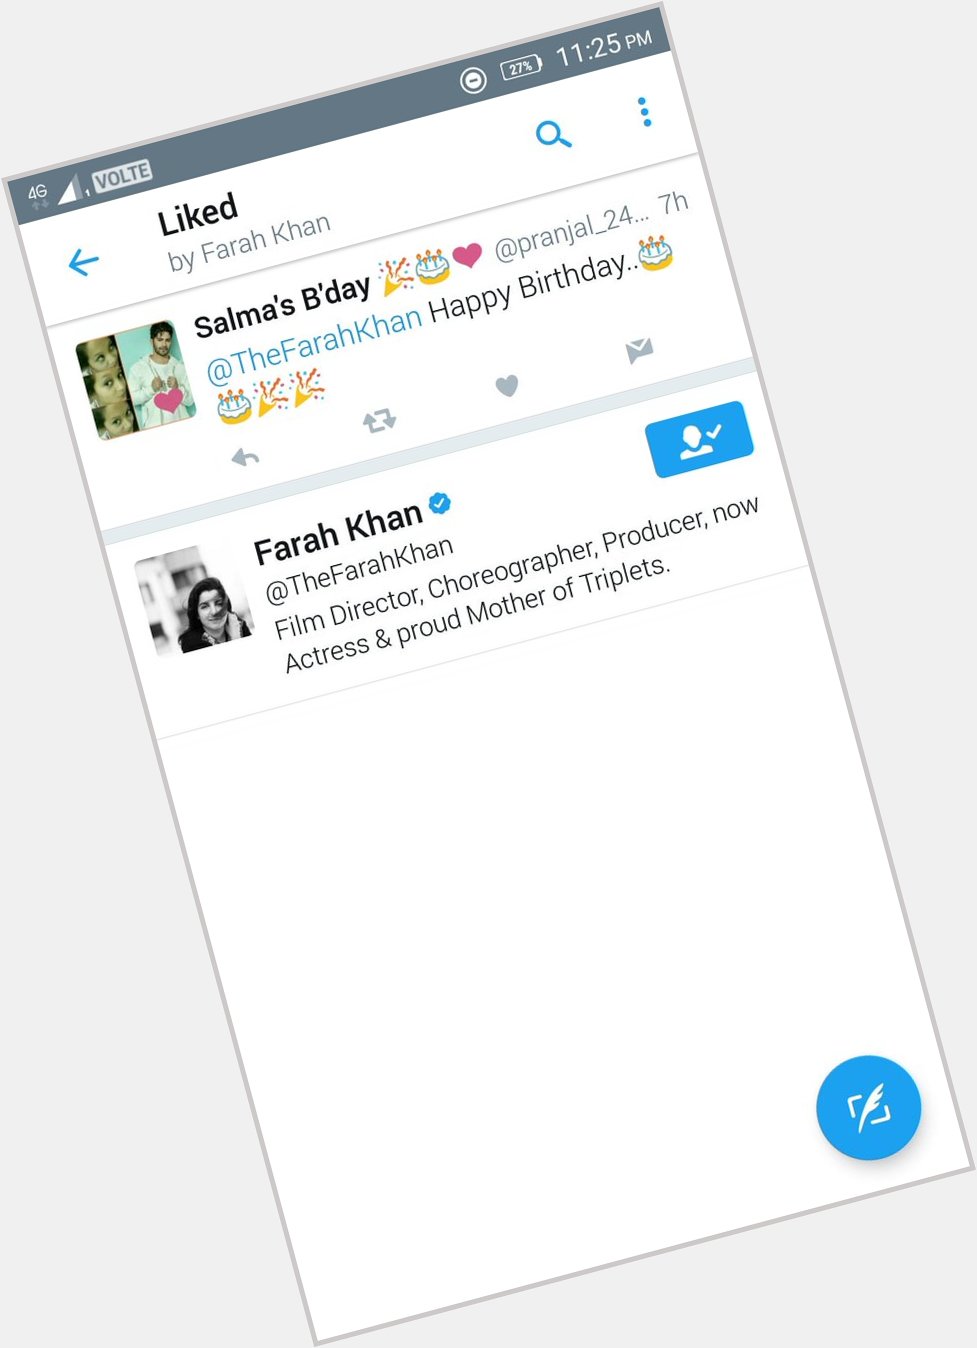 Omg can\t believe this THE FARAH KHAN LIKED MY message..  HAPPY BIRTHDAY FARAH MAM! I LOVE YOU.. 